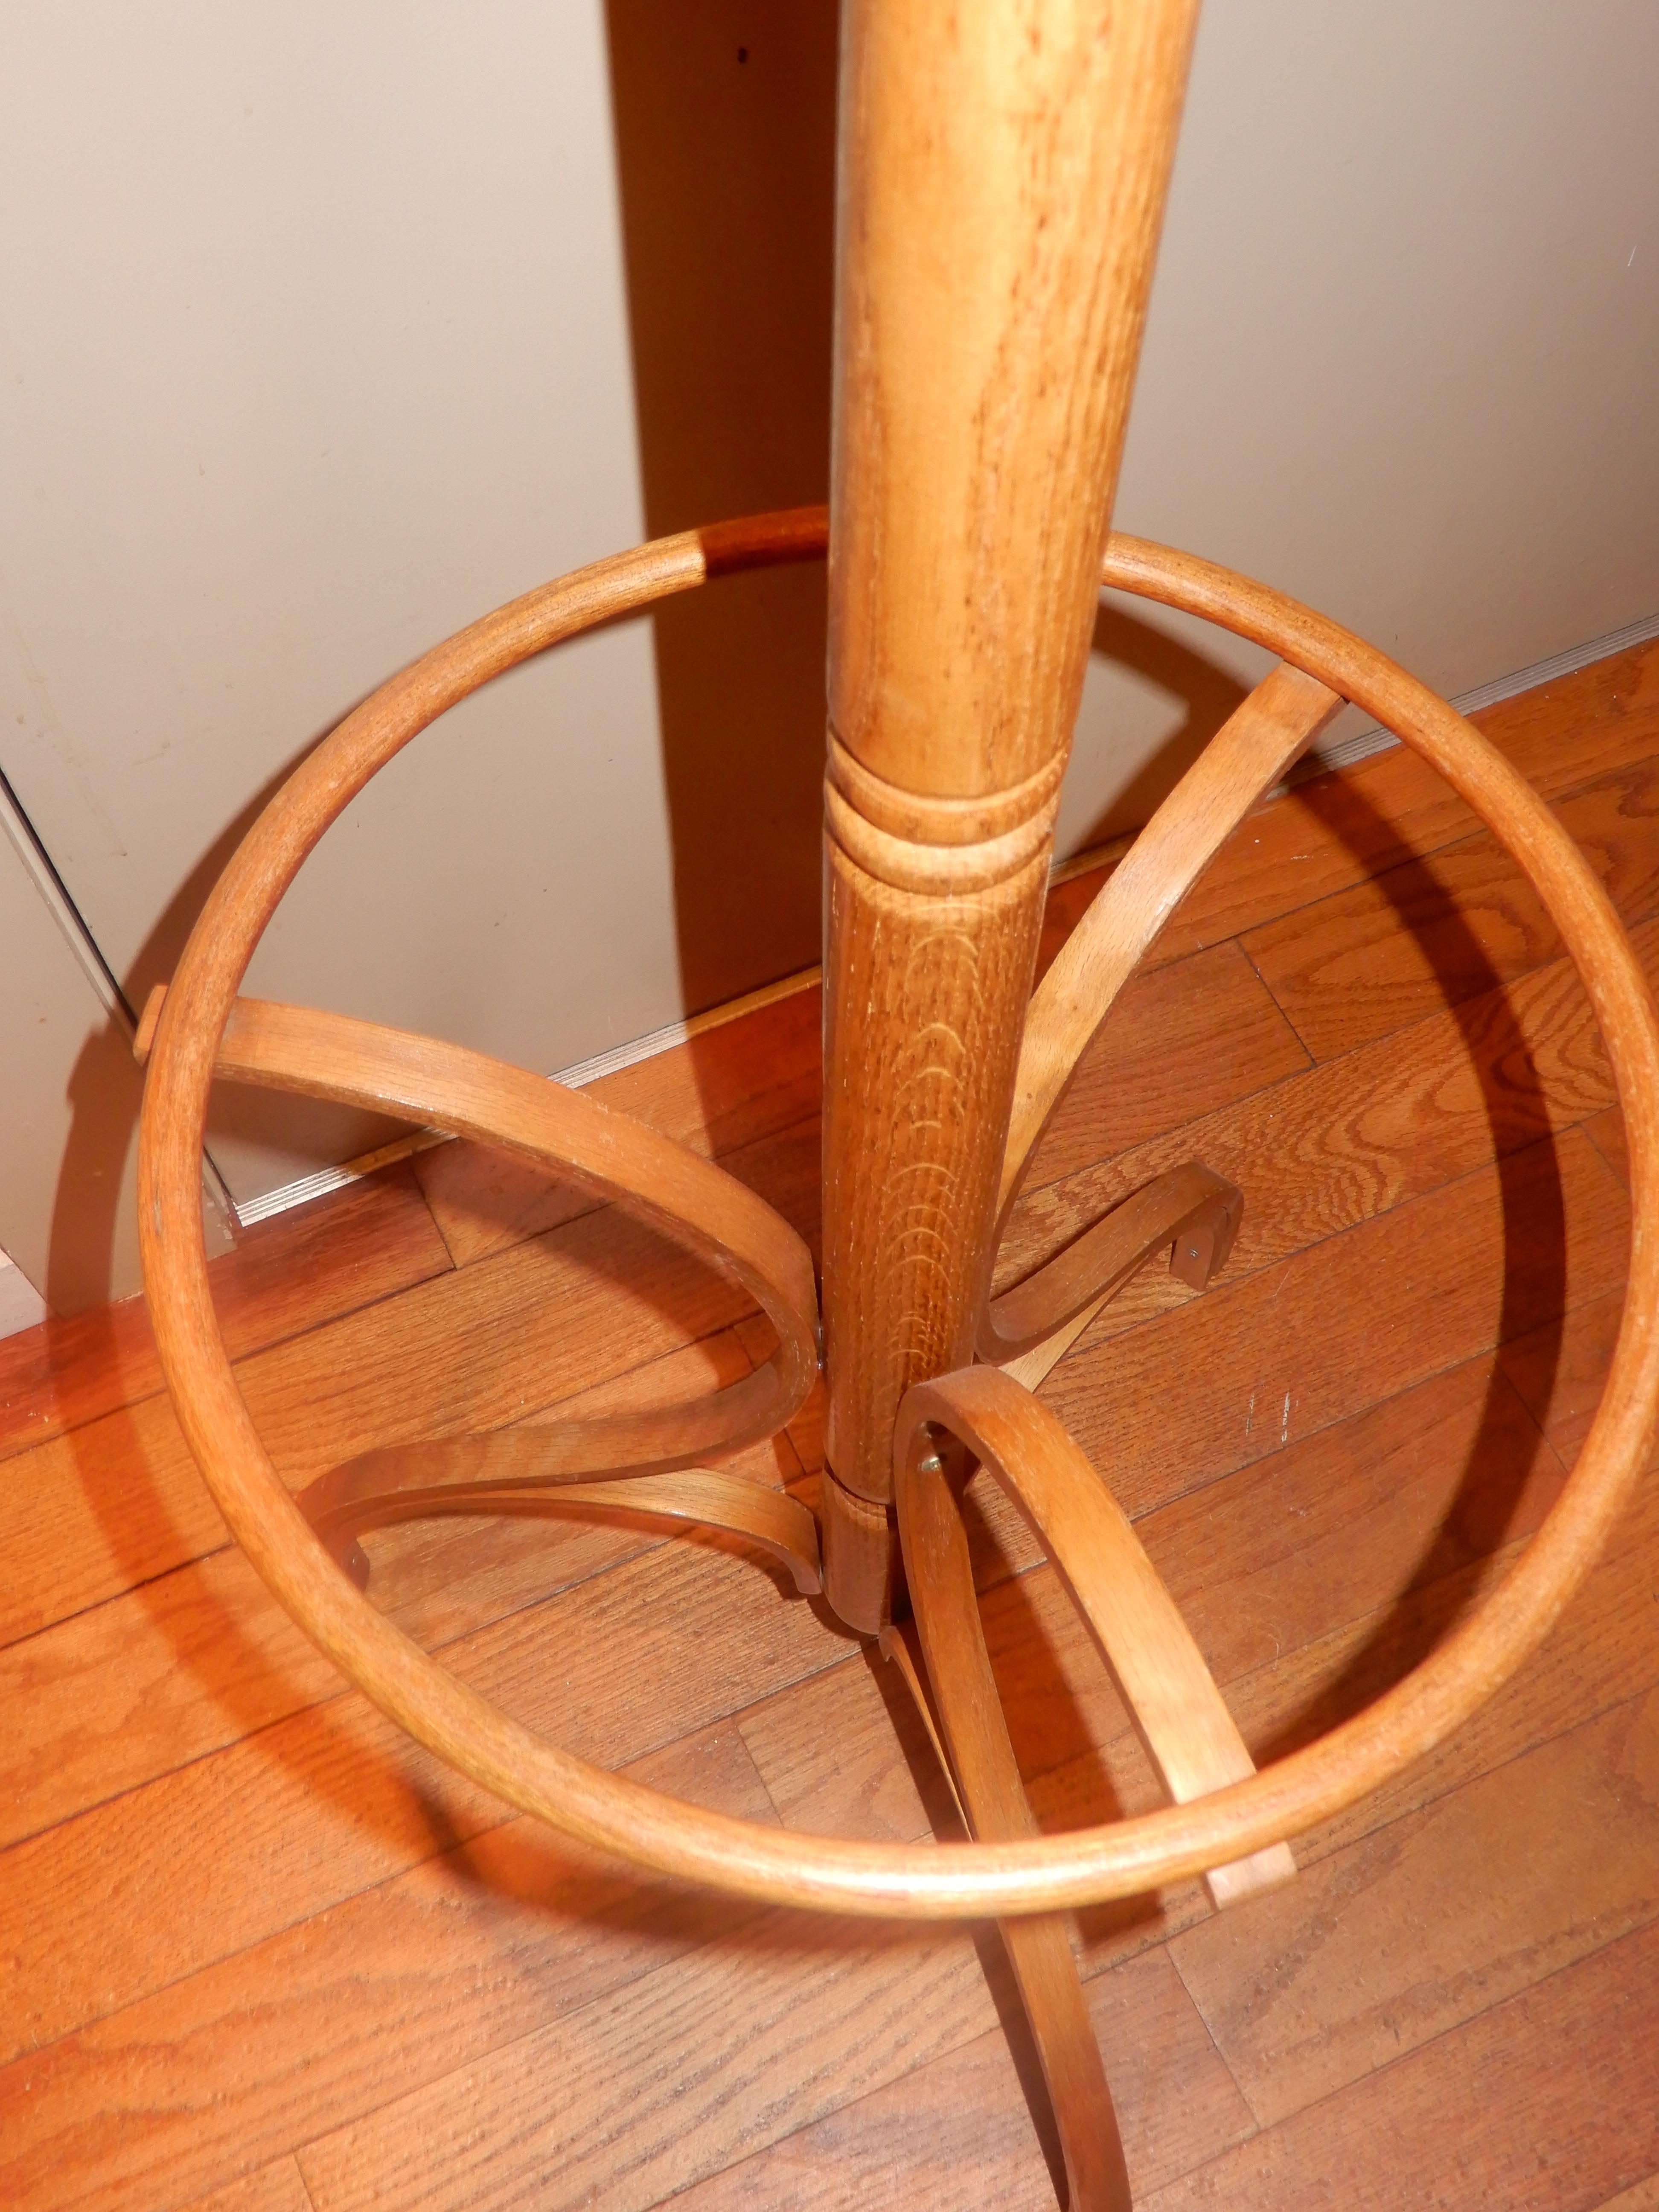 American Handcrafted White Oak Coat Stand im Zustand „Gut“ im Angebot in Bellport, NY